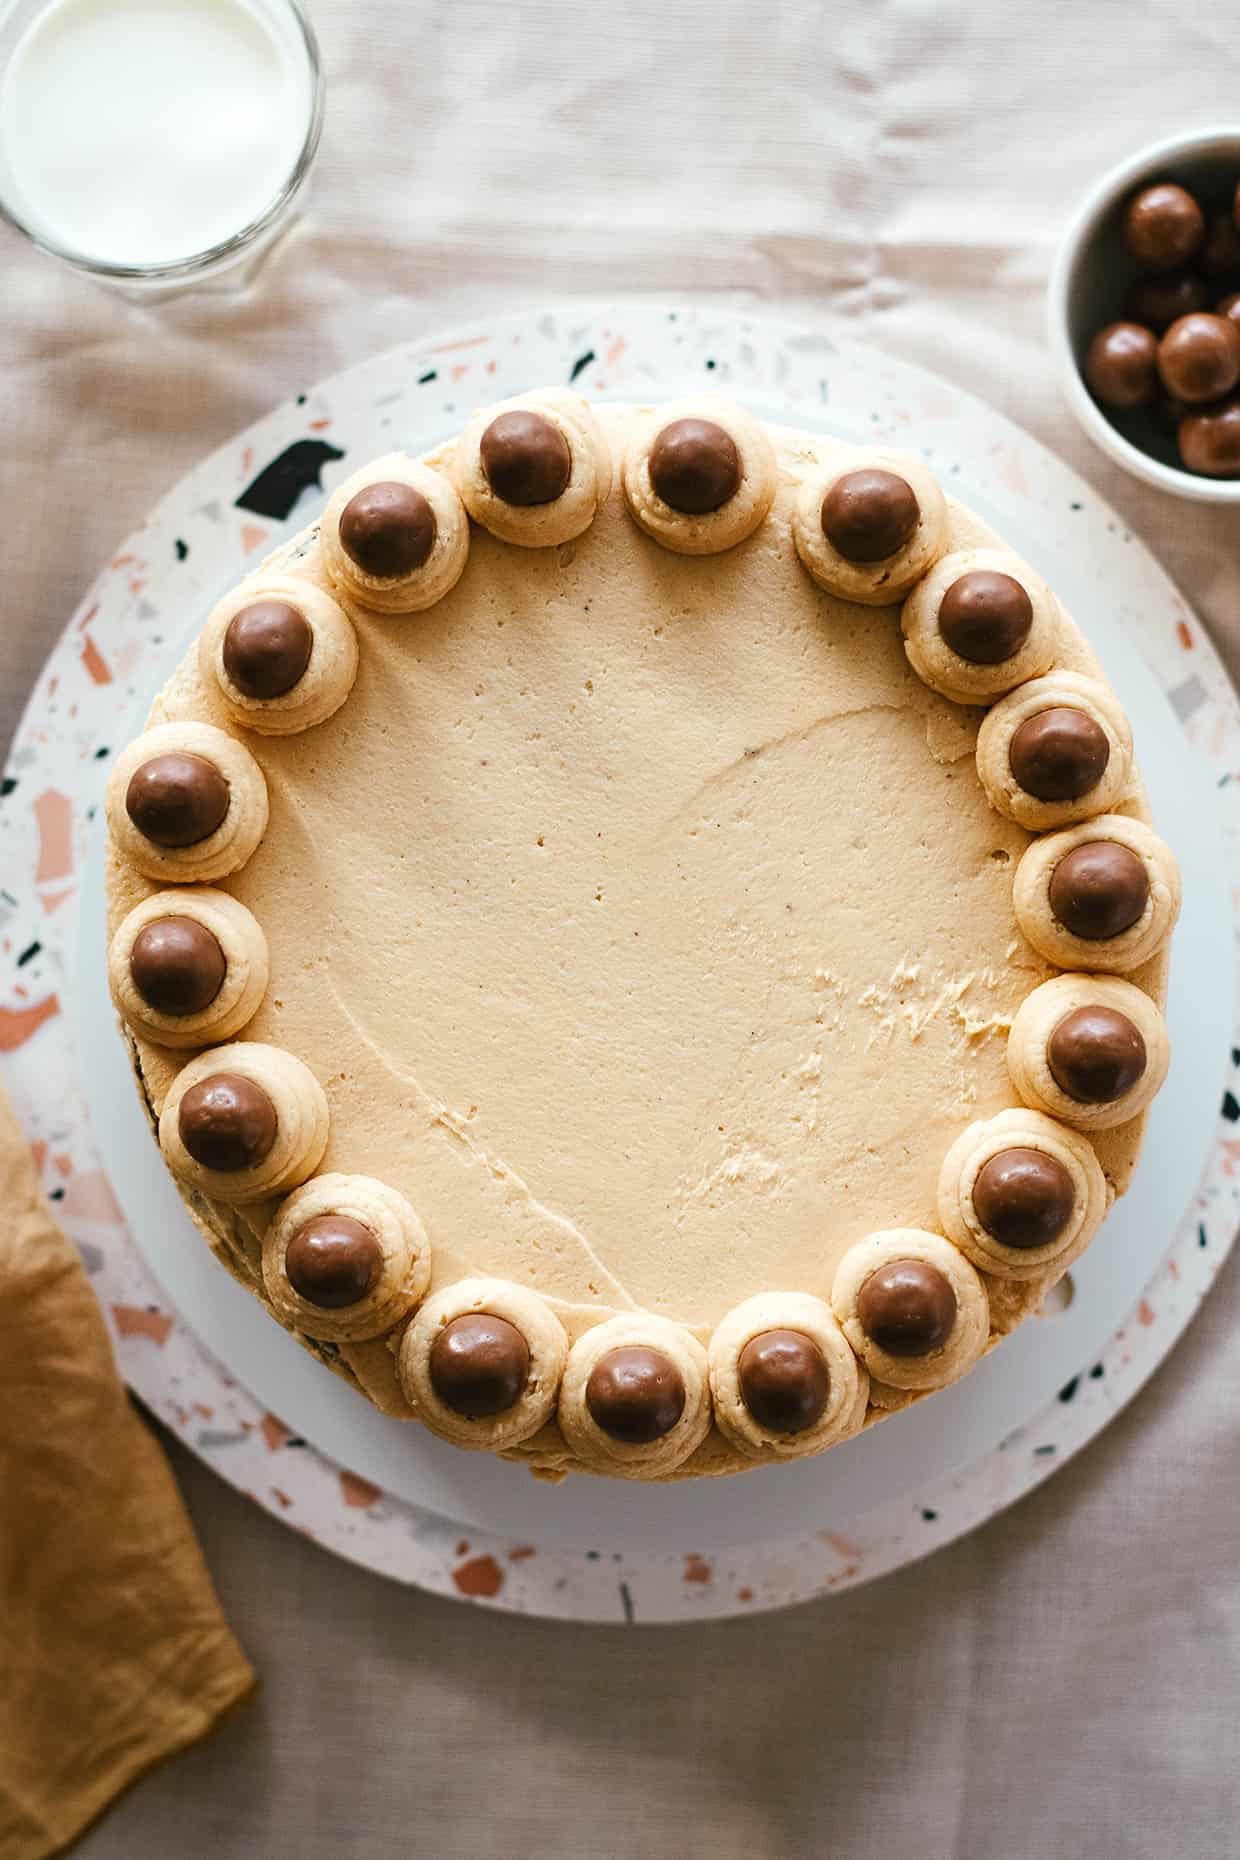 top view of peanut butter cake decorated with malt chocolate balls